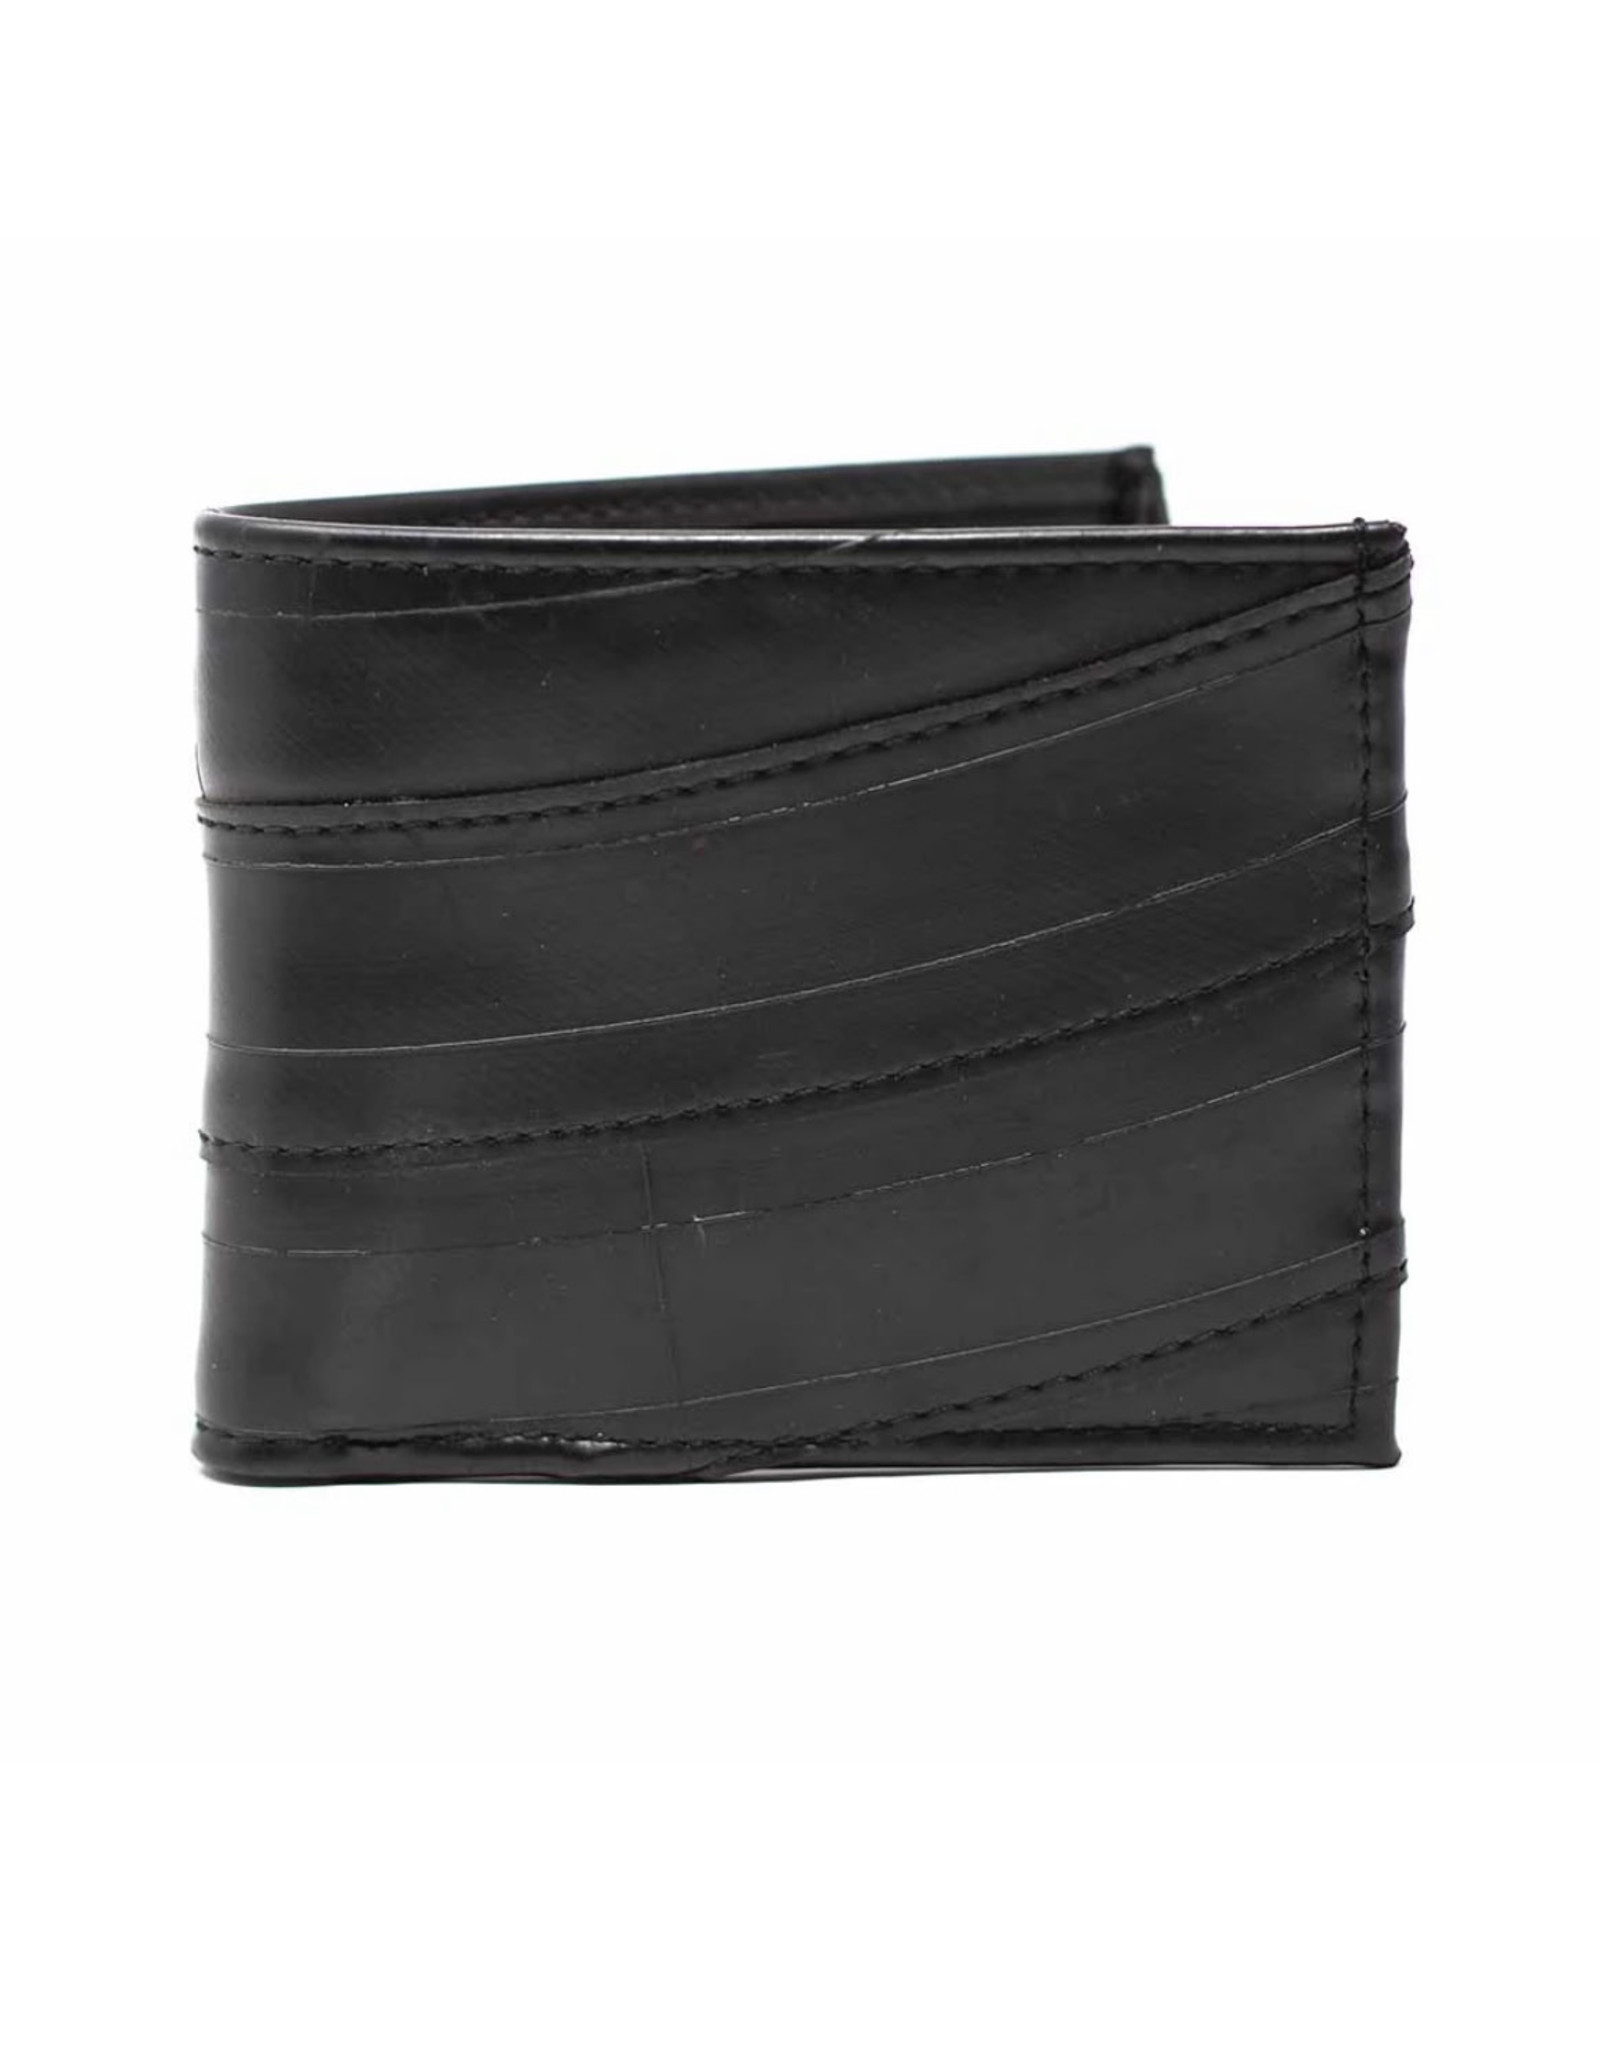 Finelaer leather Coin Pouch Purse For Men Size 4.9 x India | Ubuy